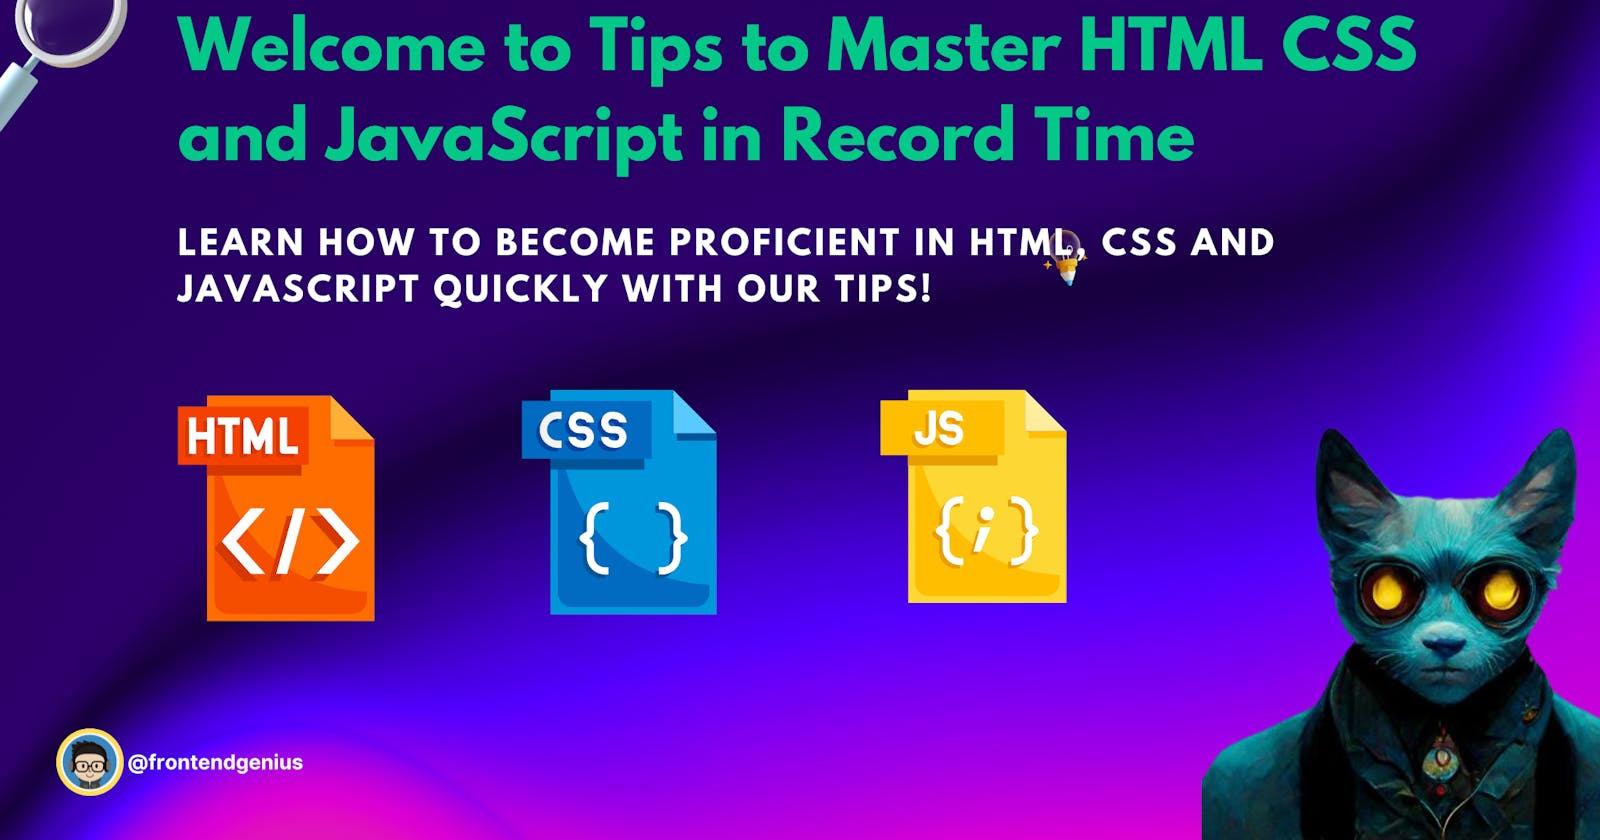 10 Tips to Master HTML CSS and JavaScript in Record Time